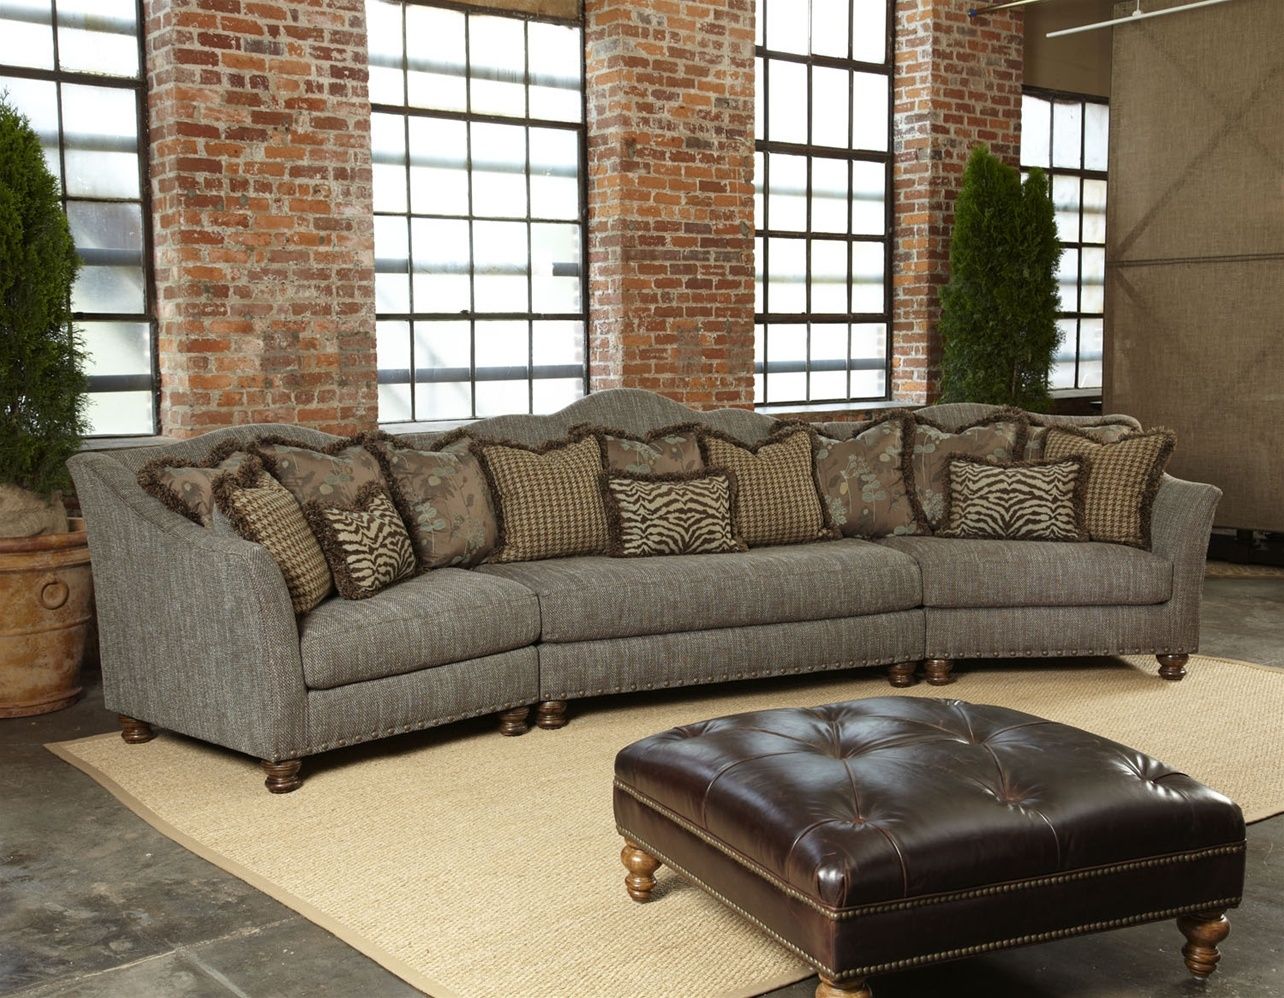 Beautiful Sectional Sofas Tampa 47 For Diana Dark Brown Leather Pertaining To Diana Dark Brown Leather Sectional Sofa Set (View 8 of 15)